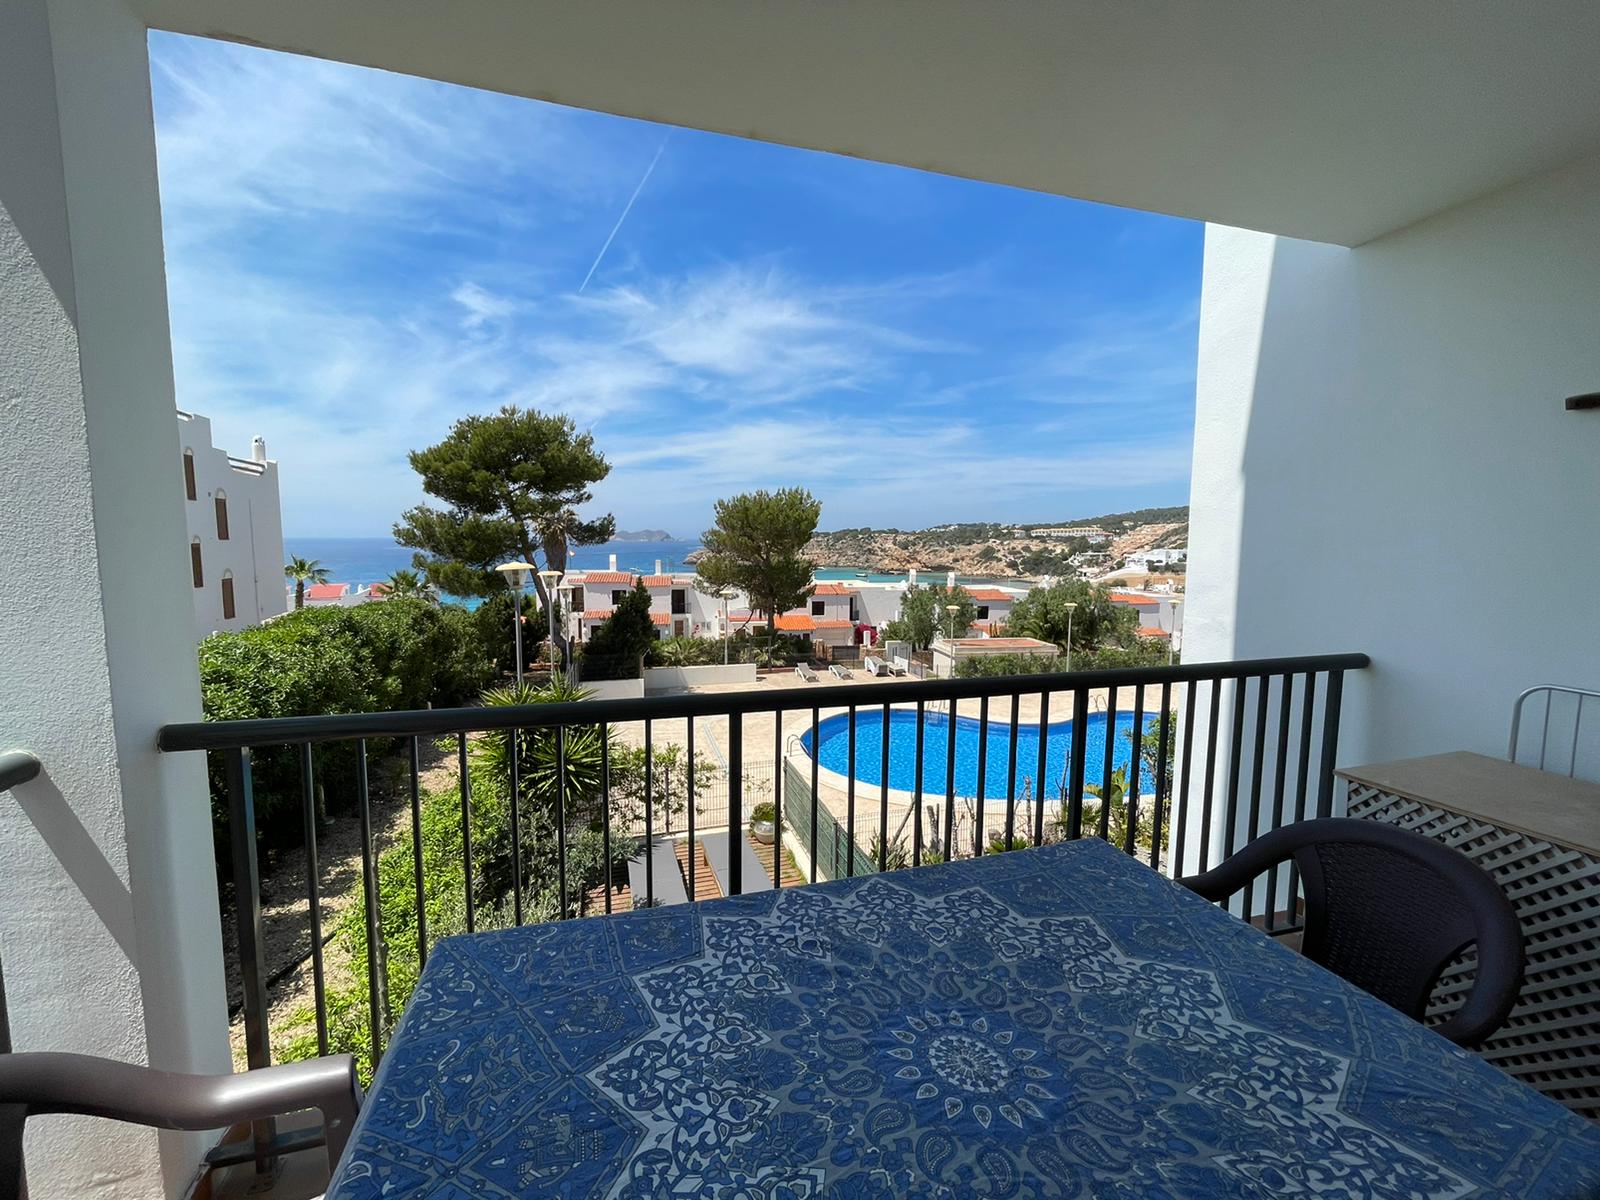 Well maintained apartment in Cala Tarida, right on the beach.